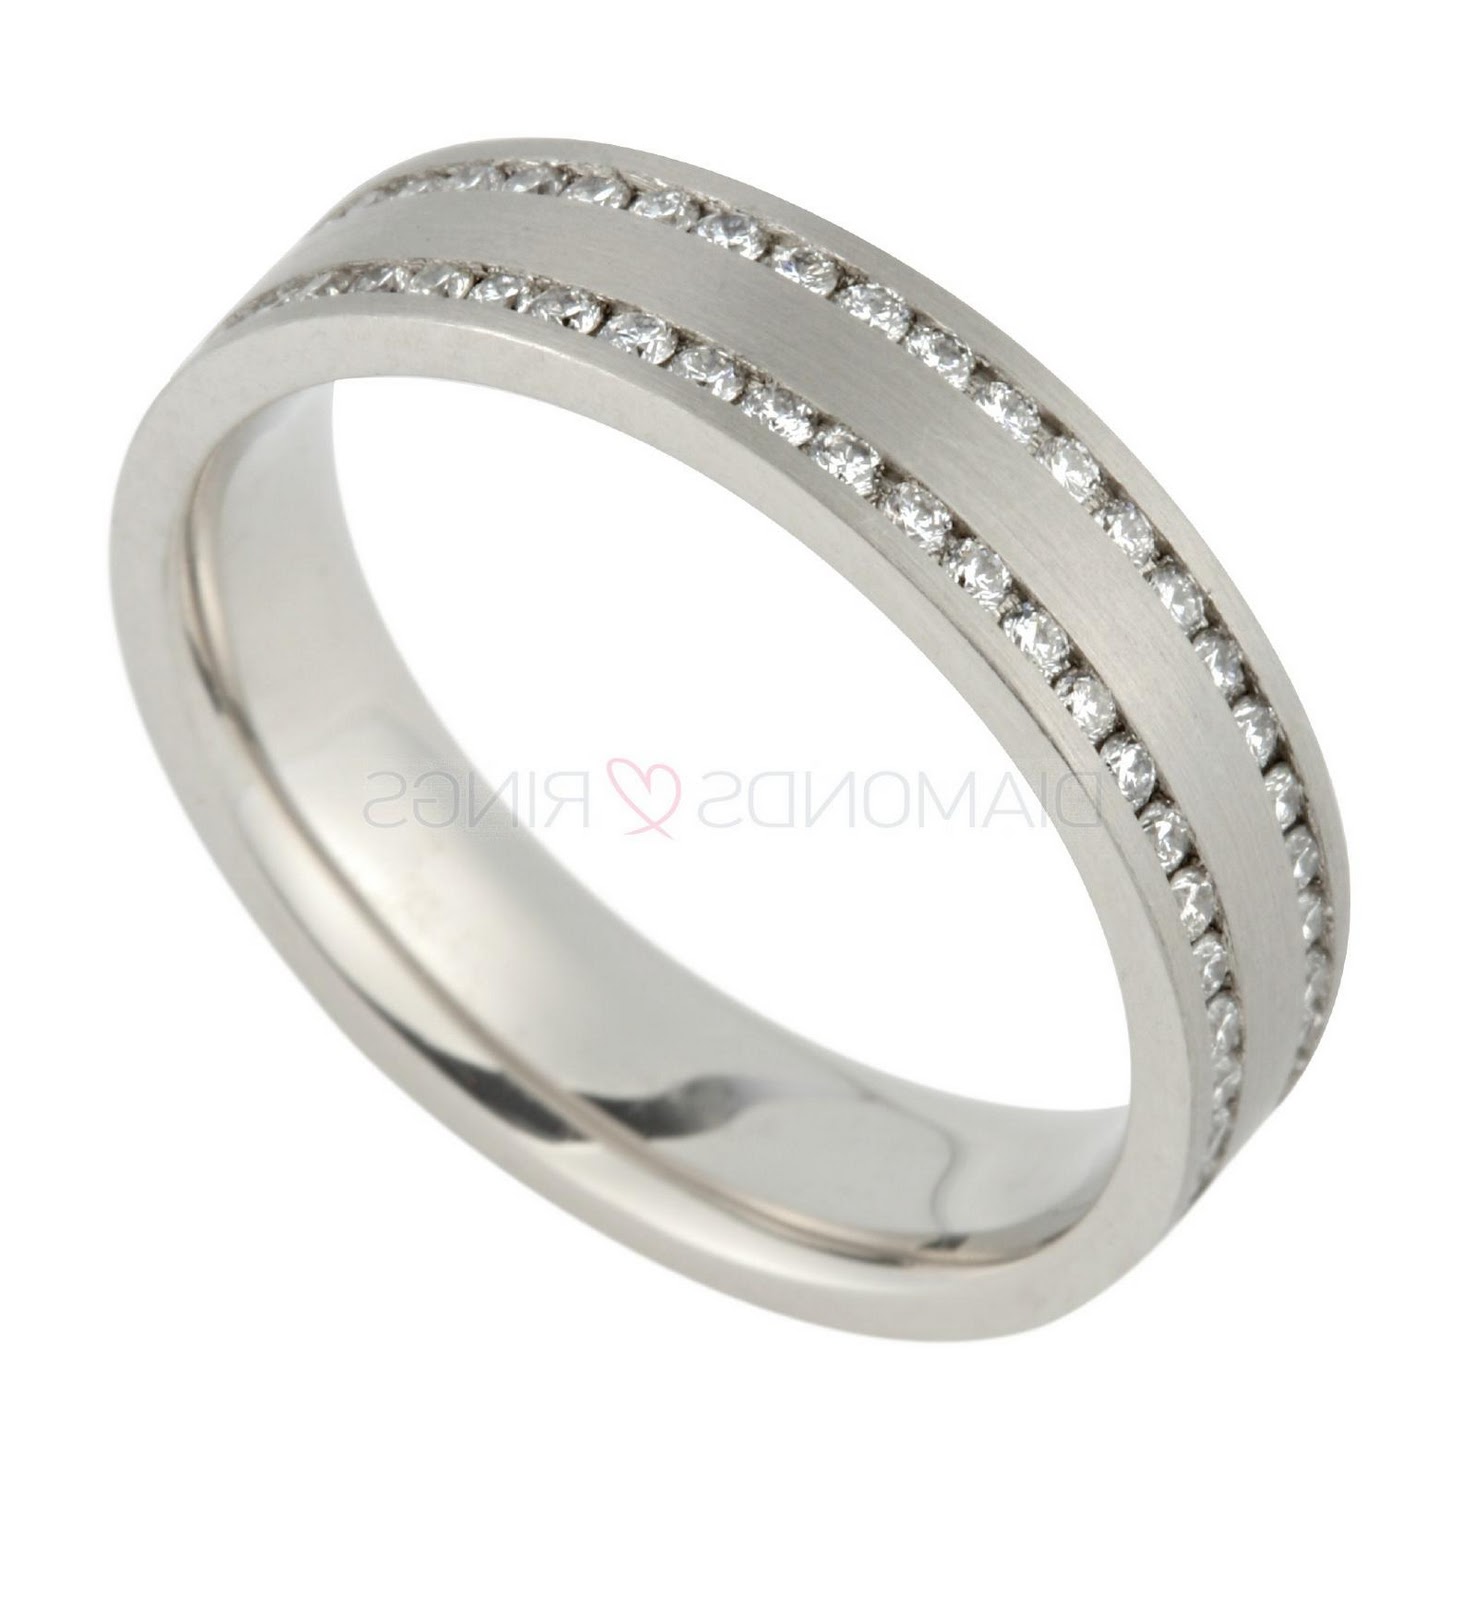 4.5mm ring set with 112